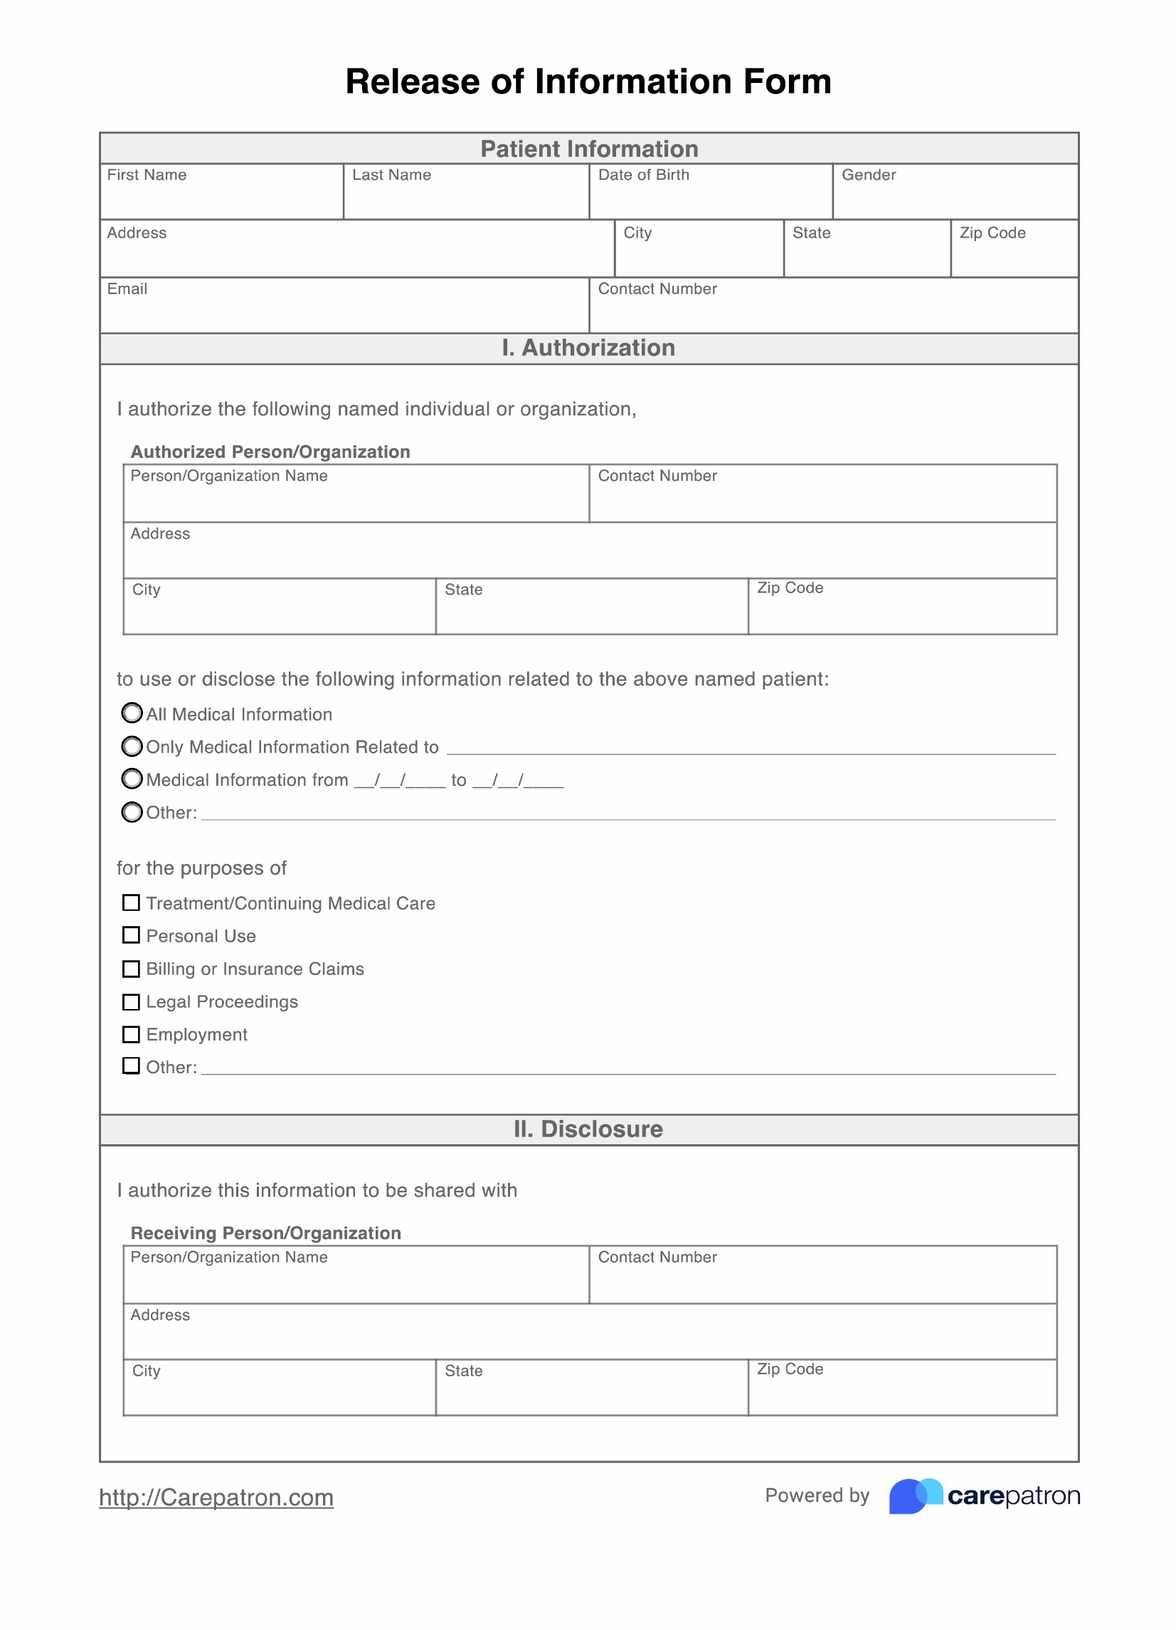 Release Of Information Form PDF Example